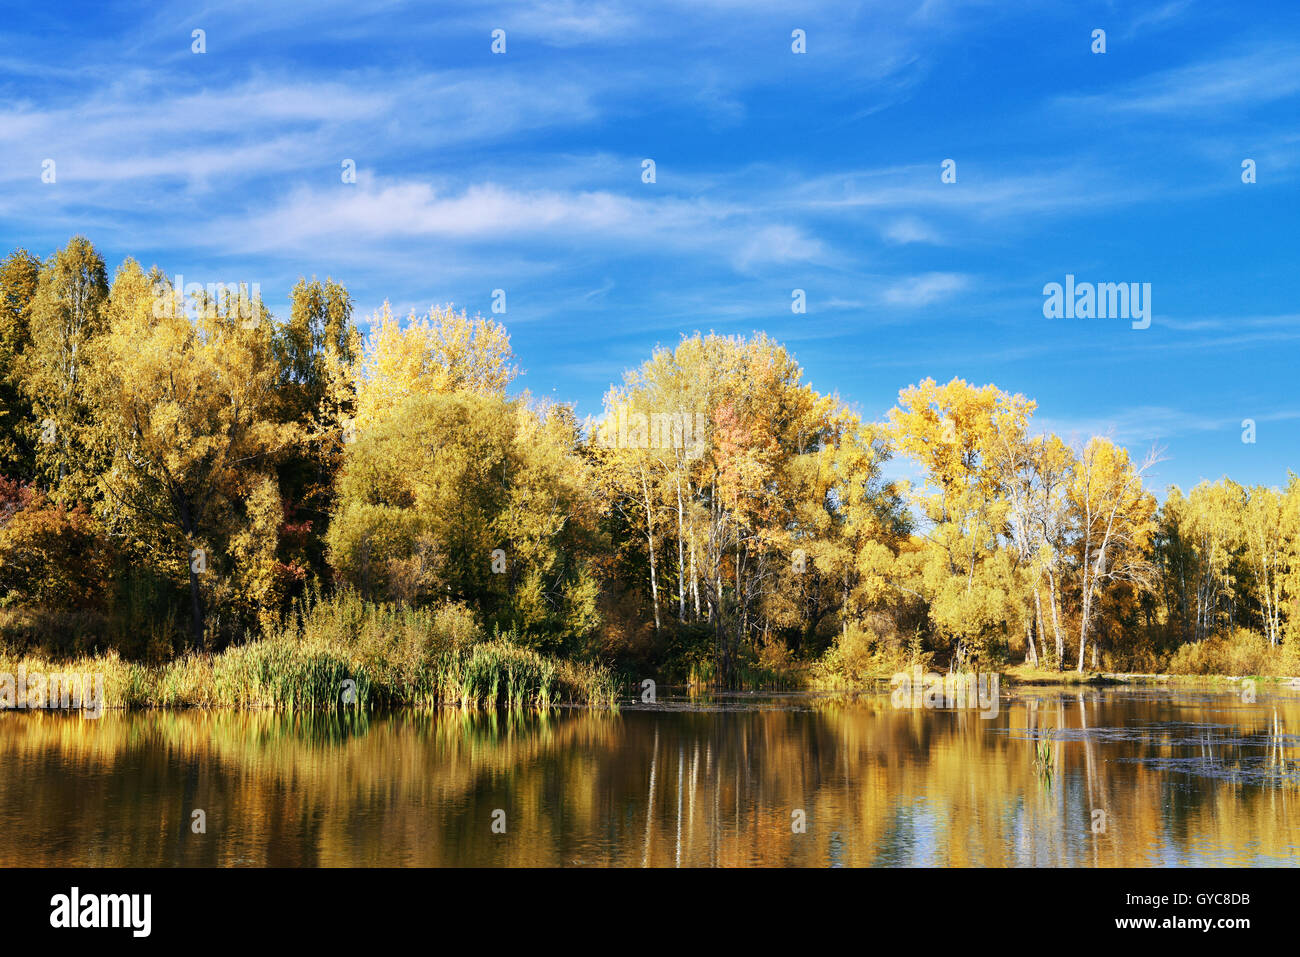 Poplar trees with yellow leaves reflected in the waters of the lake in autumn day Stock Photo